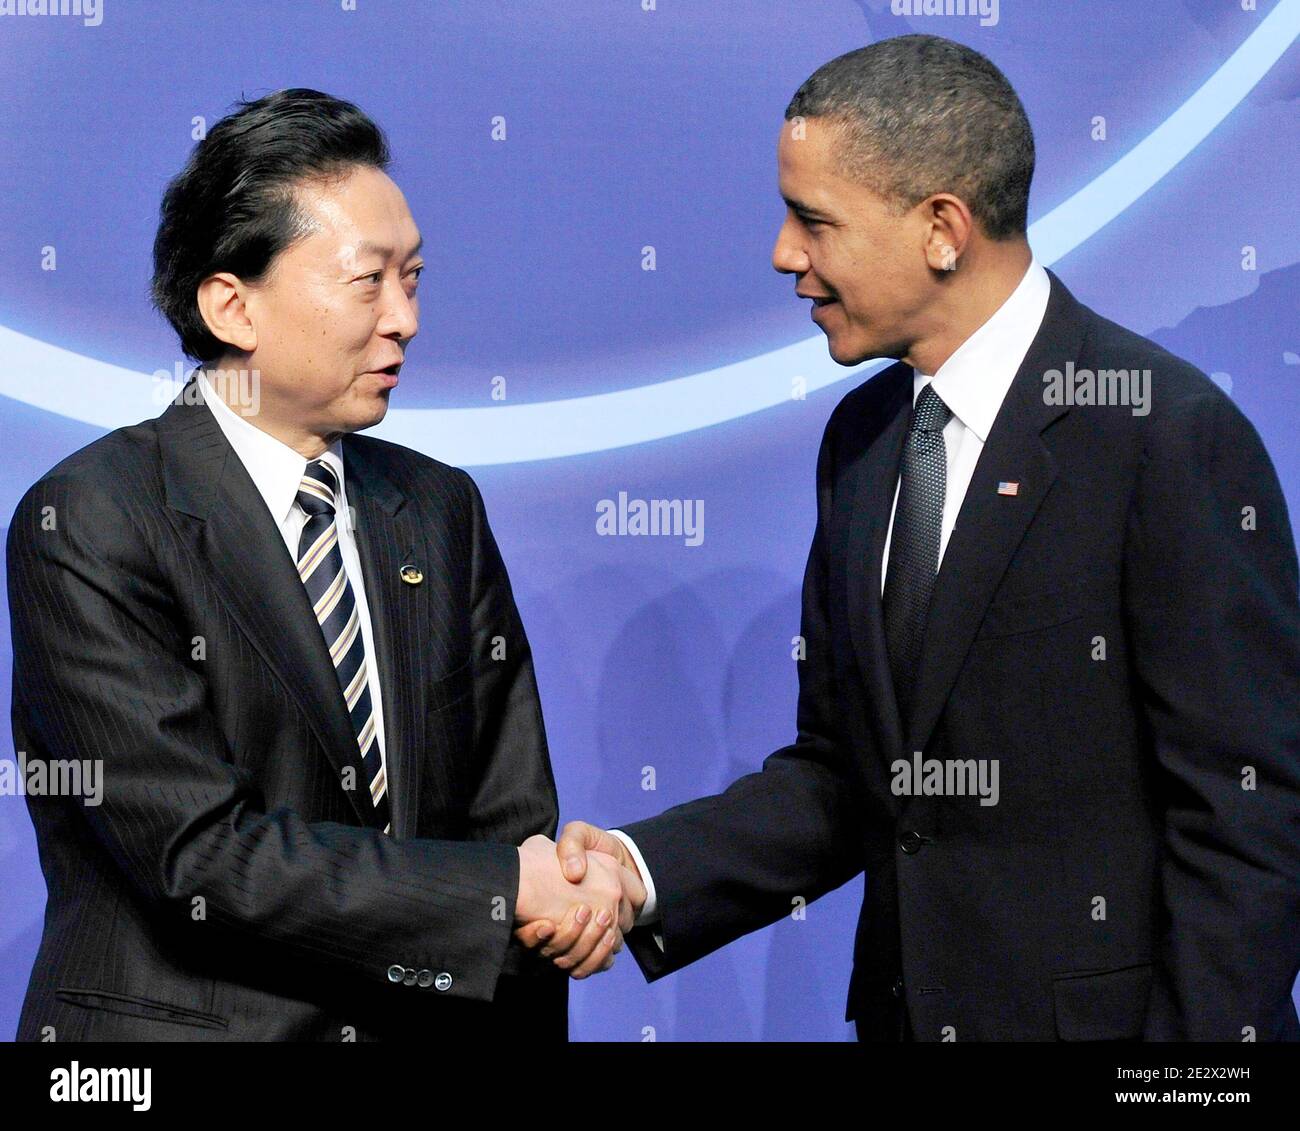 Barack Obama welcomes Prime Minister Yukio Hatoyama of Japan to the Nuclear Security Summit at the Washington Convention Center in Washington, DC, USA, April 12, 2010. Photo by Ron Sachs/ABACAPRESS.COM Stock Photo